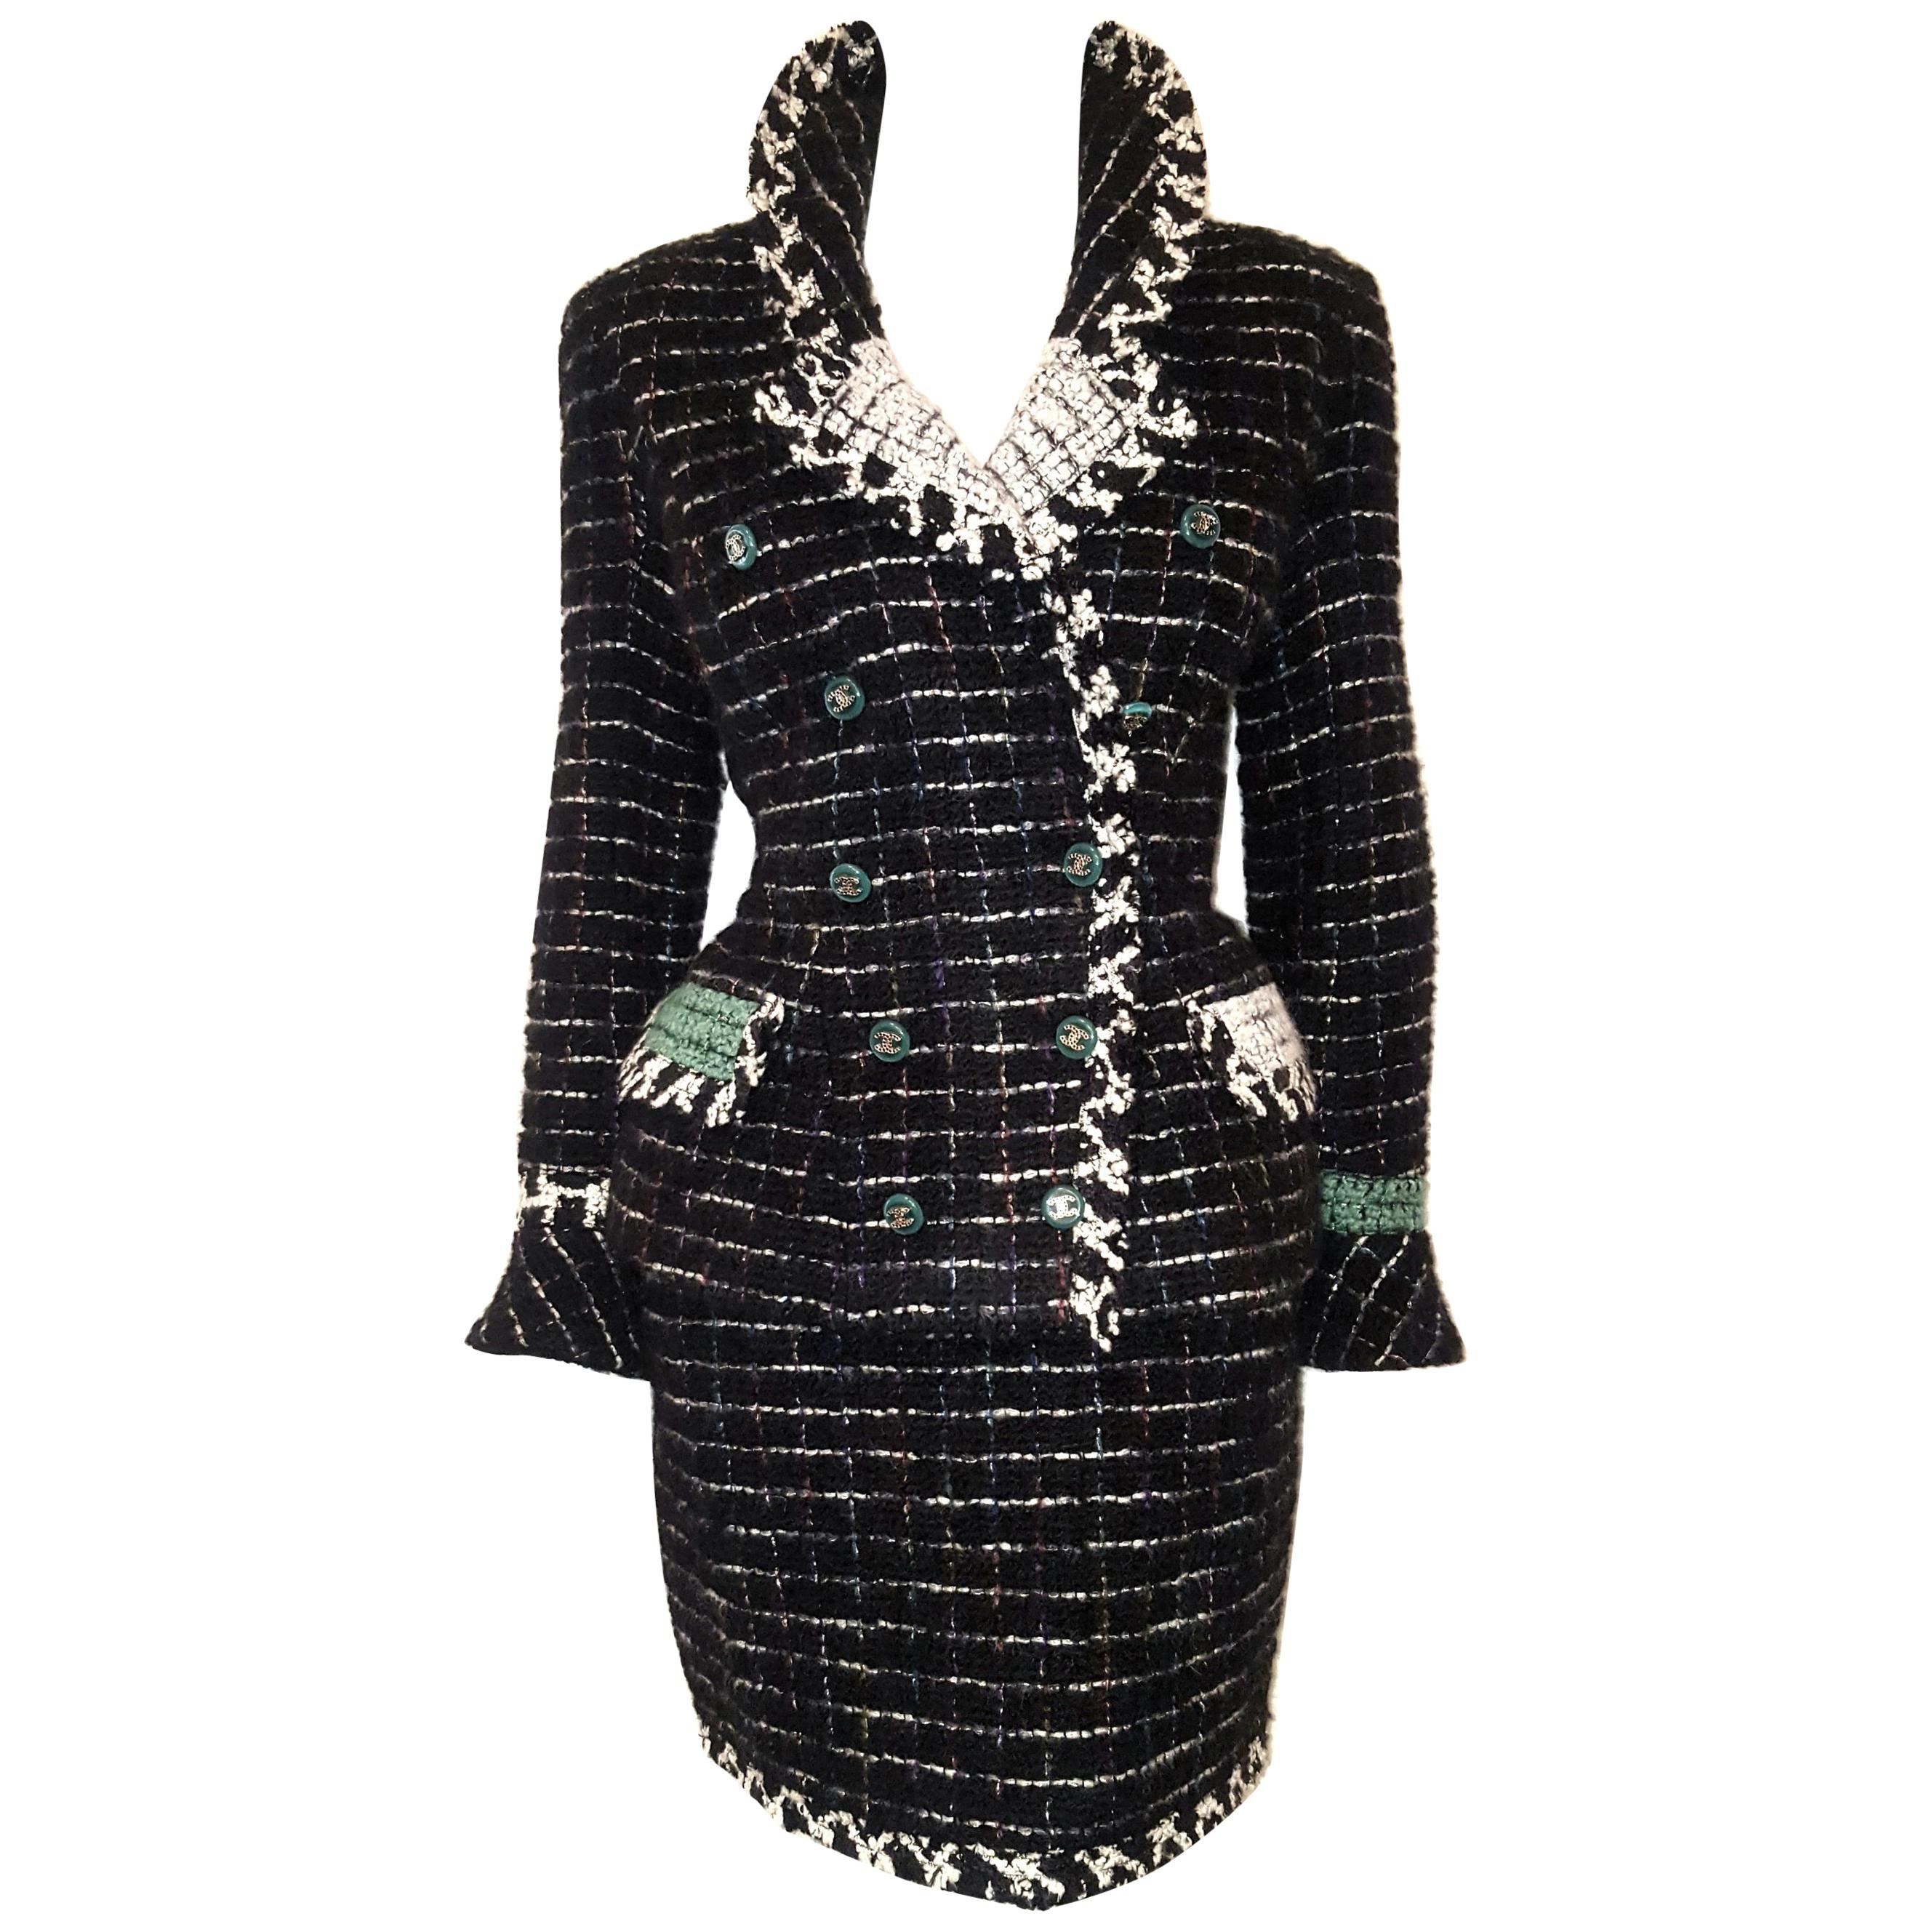 Chanel Black & White Metallic Tweed Check Double Breasted Skirt Suit 42